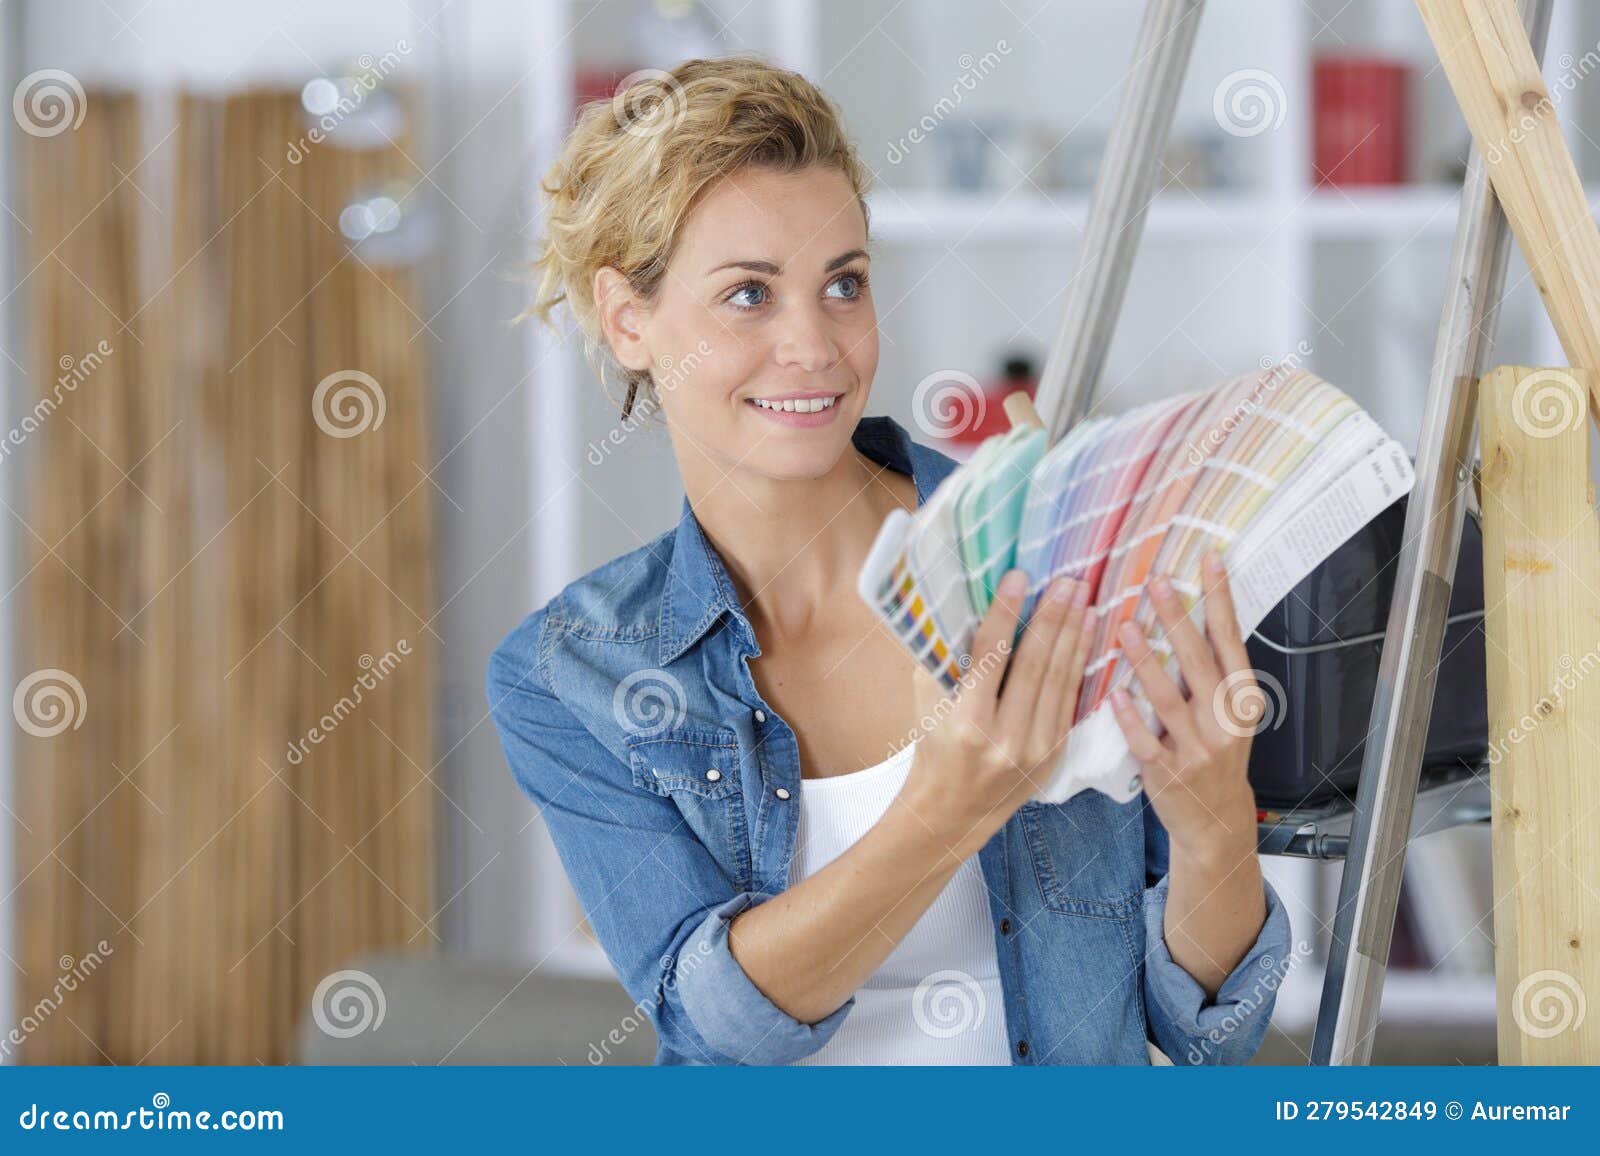 Woman with Scale Paint Swatches Stock Image - Image of palette ...